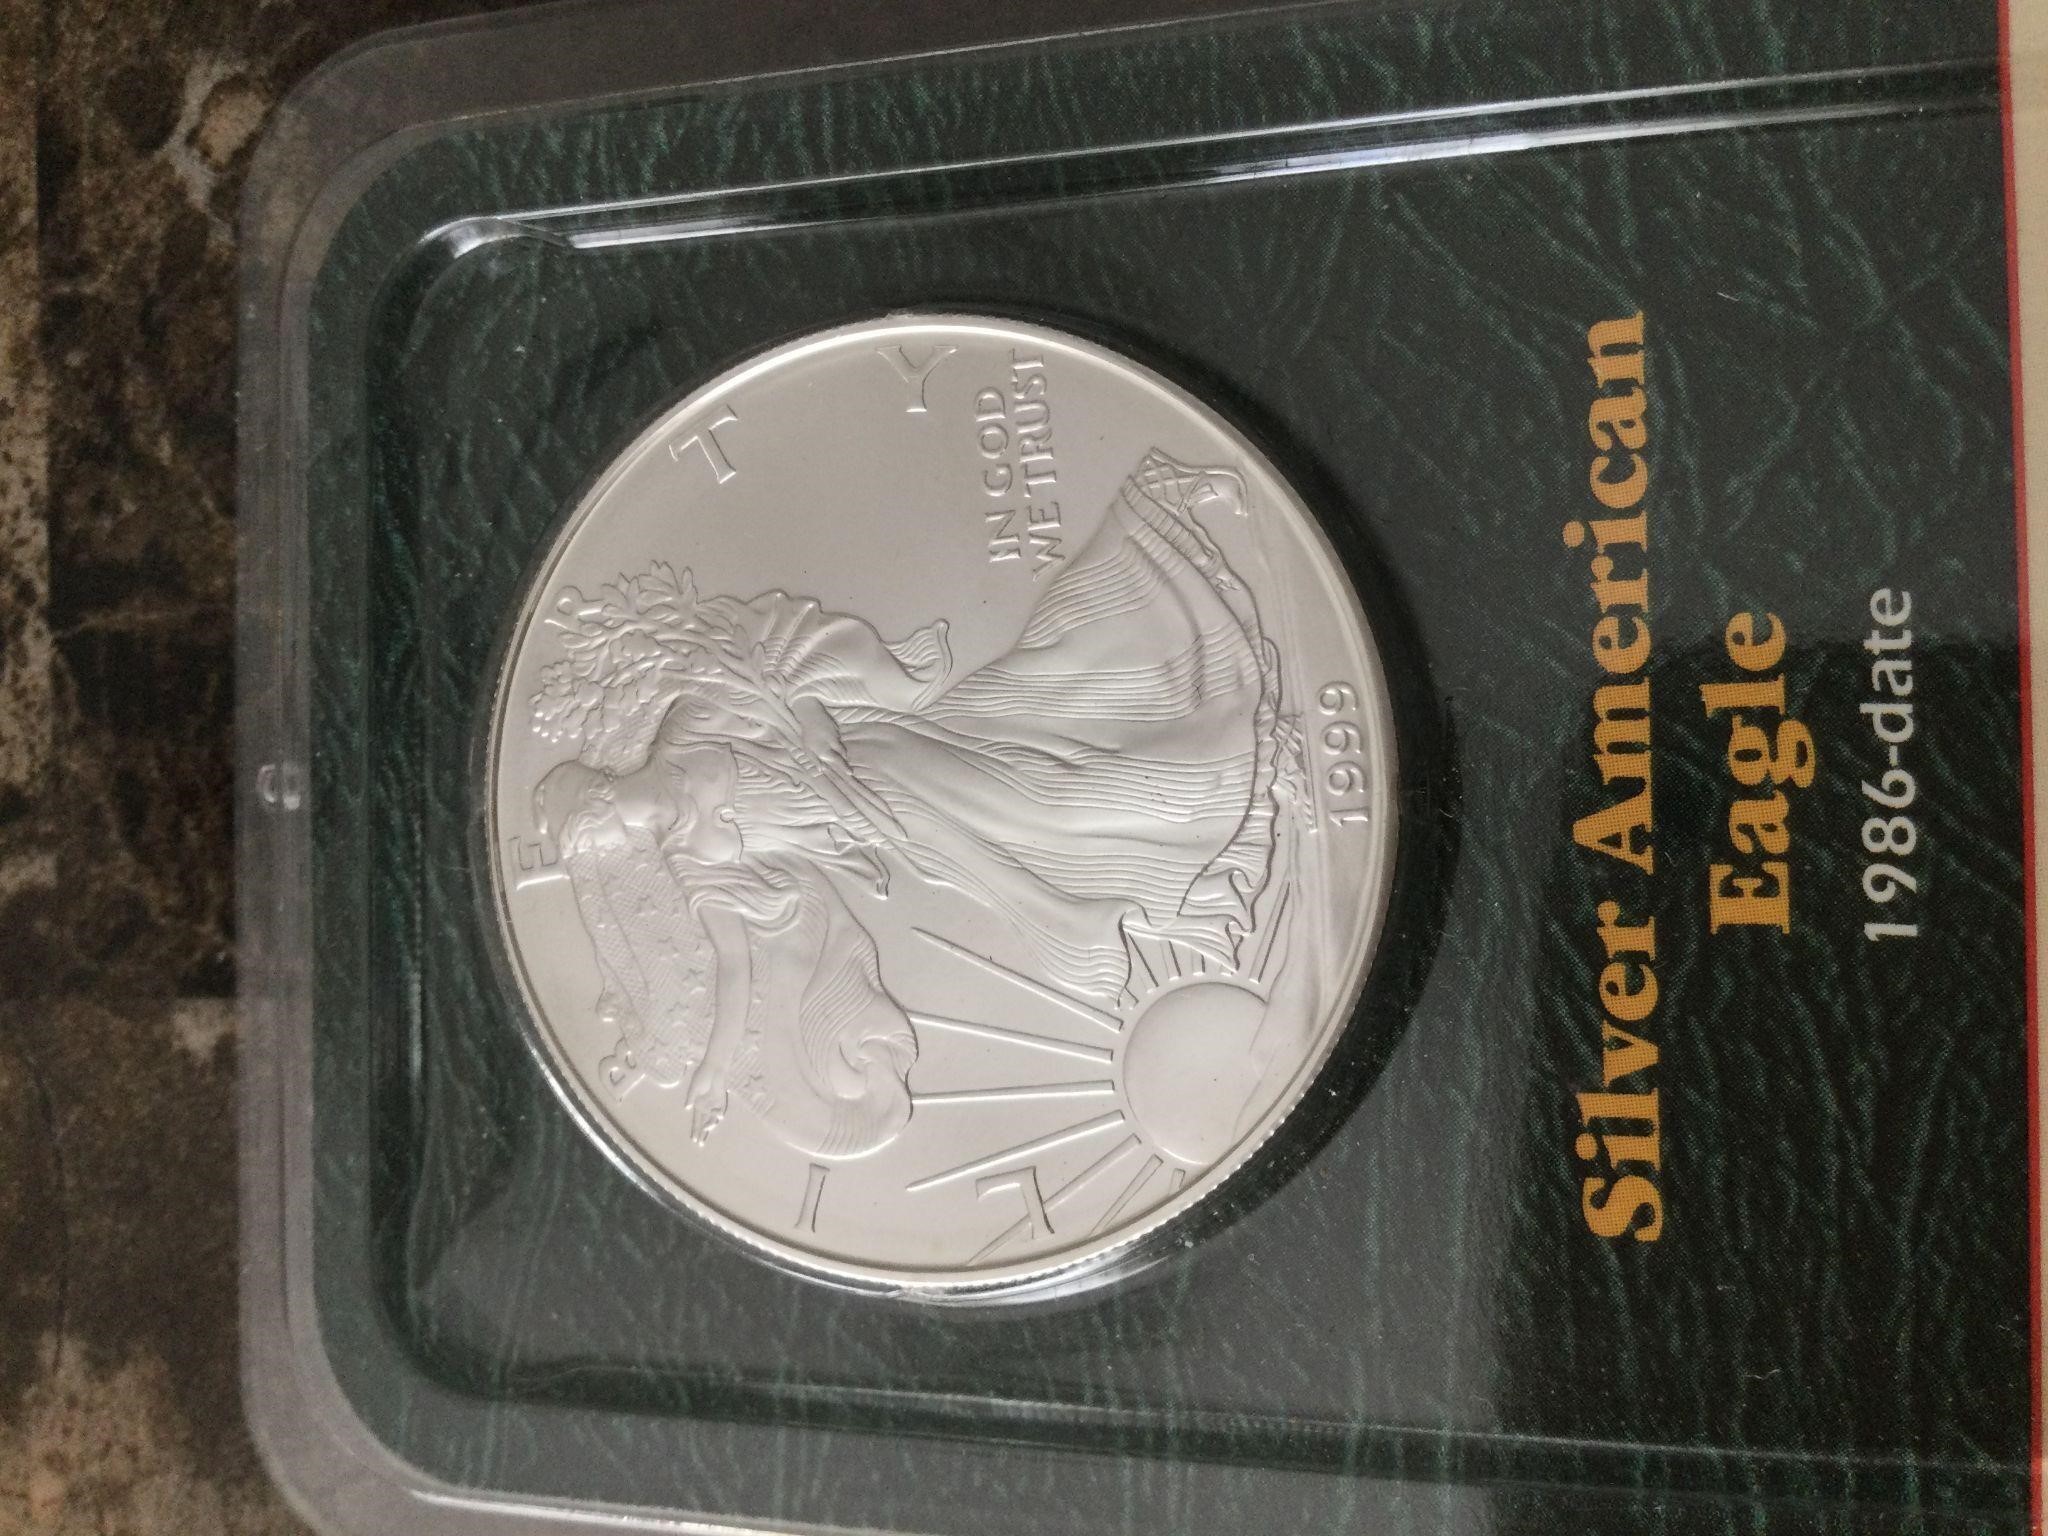 MS70 UNCIRCULATED 1999 US SILVER EAGLE